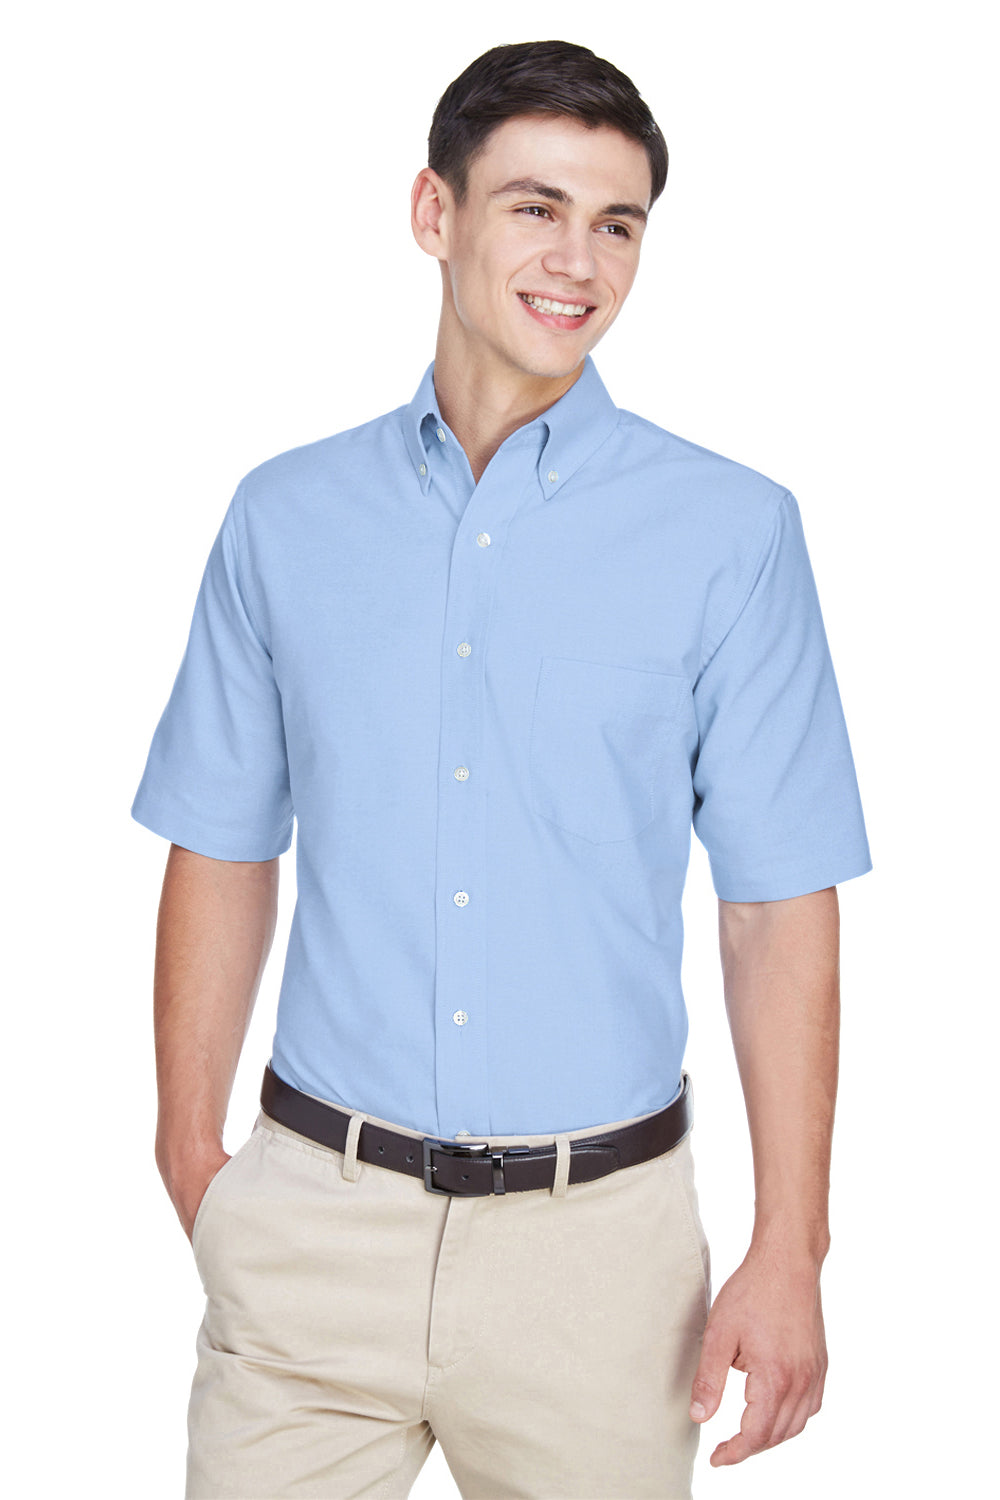 UltraClub 8972 Mens Classic Oxford Wrinkle Resistant Short Sleeve Button Down Shirt w/ Pocket Light Blue Front